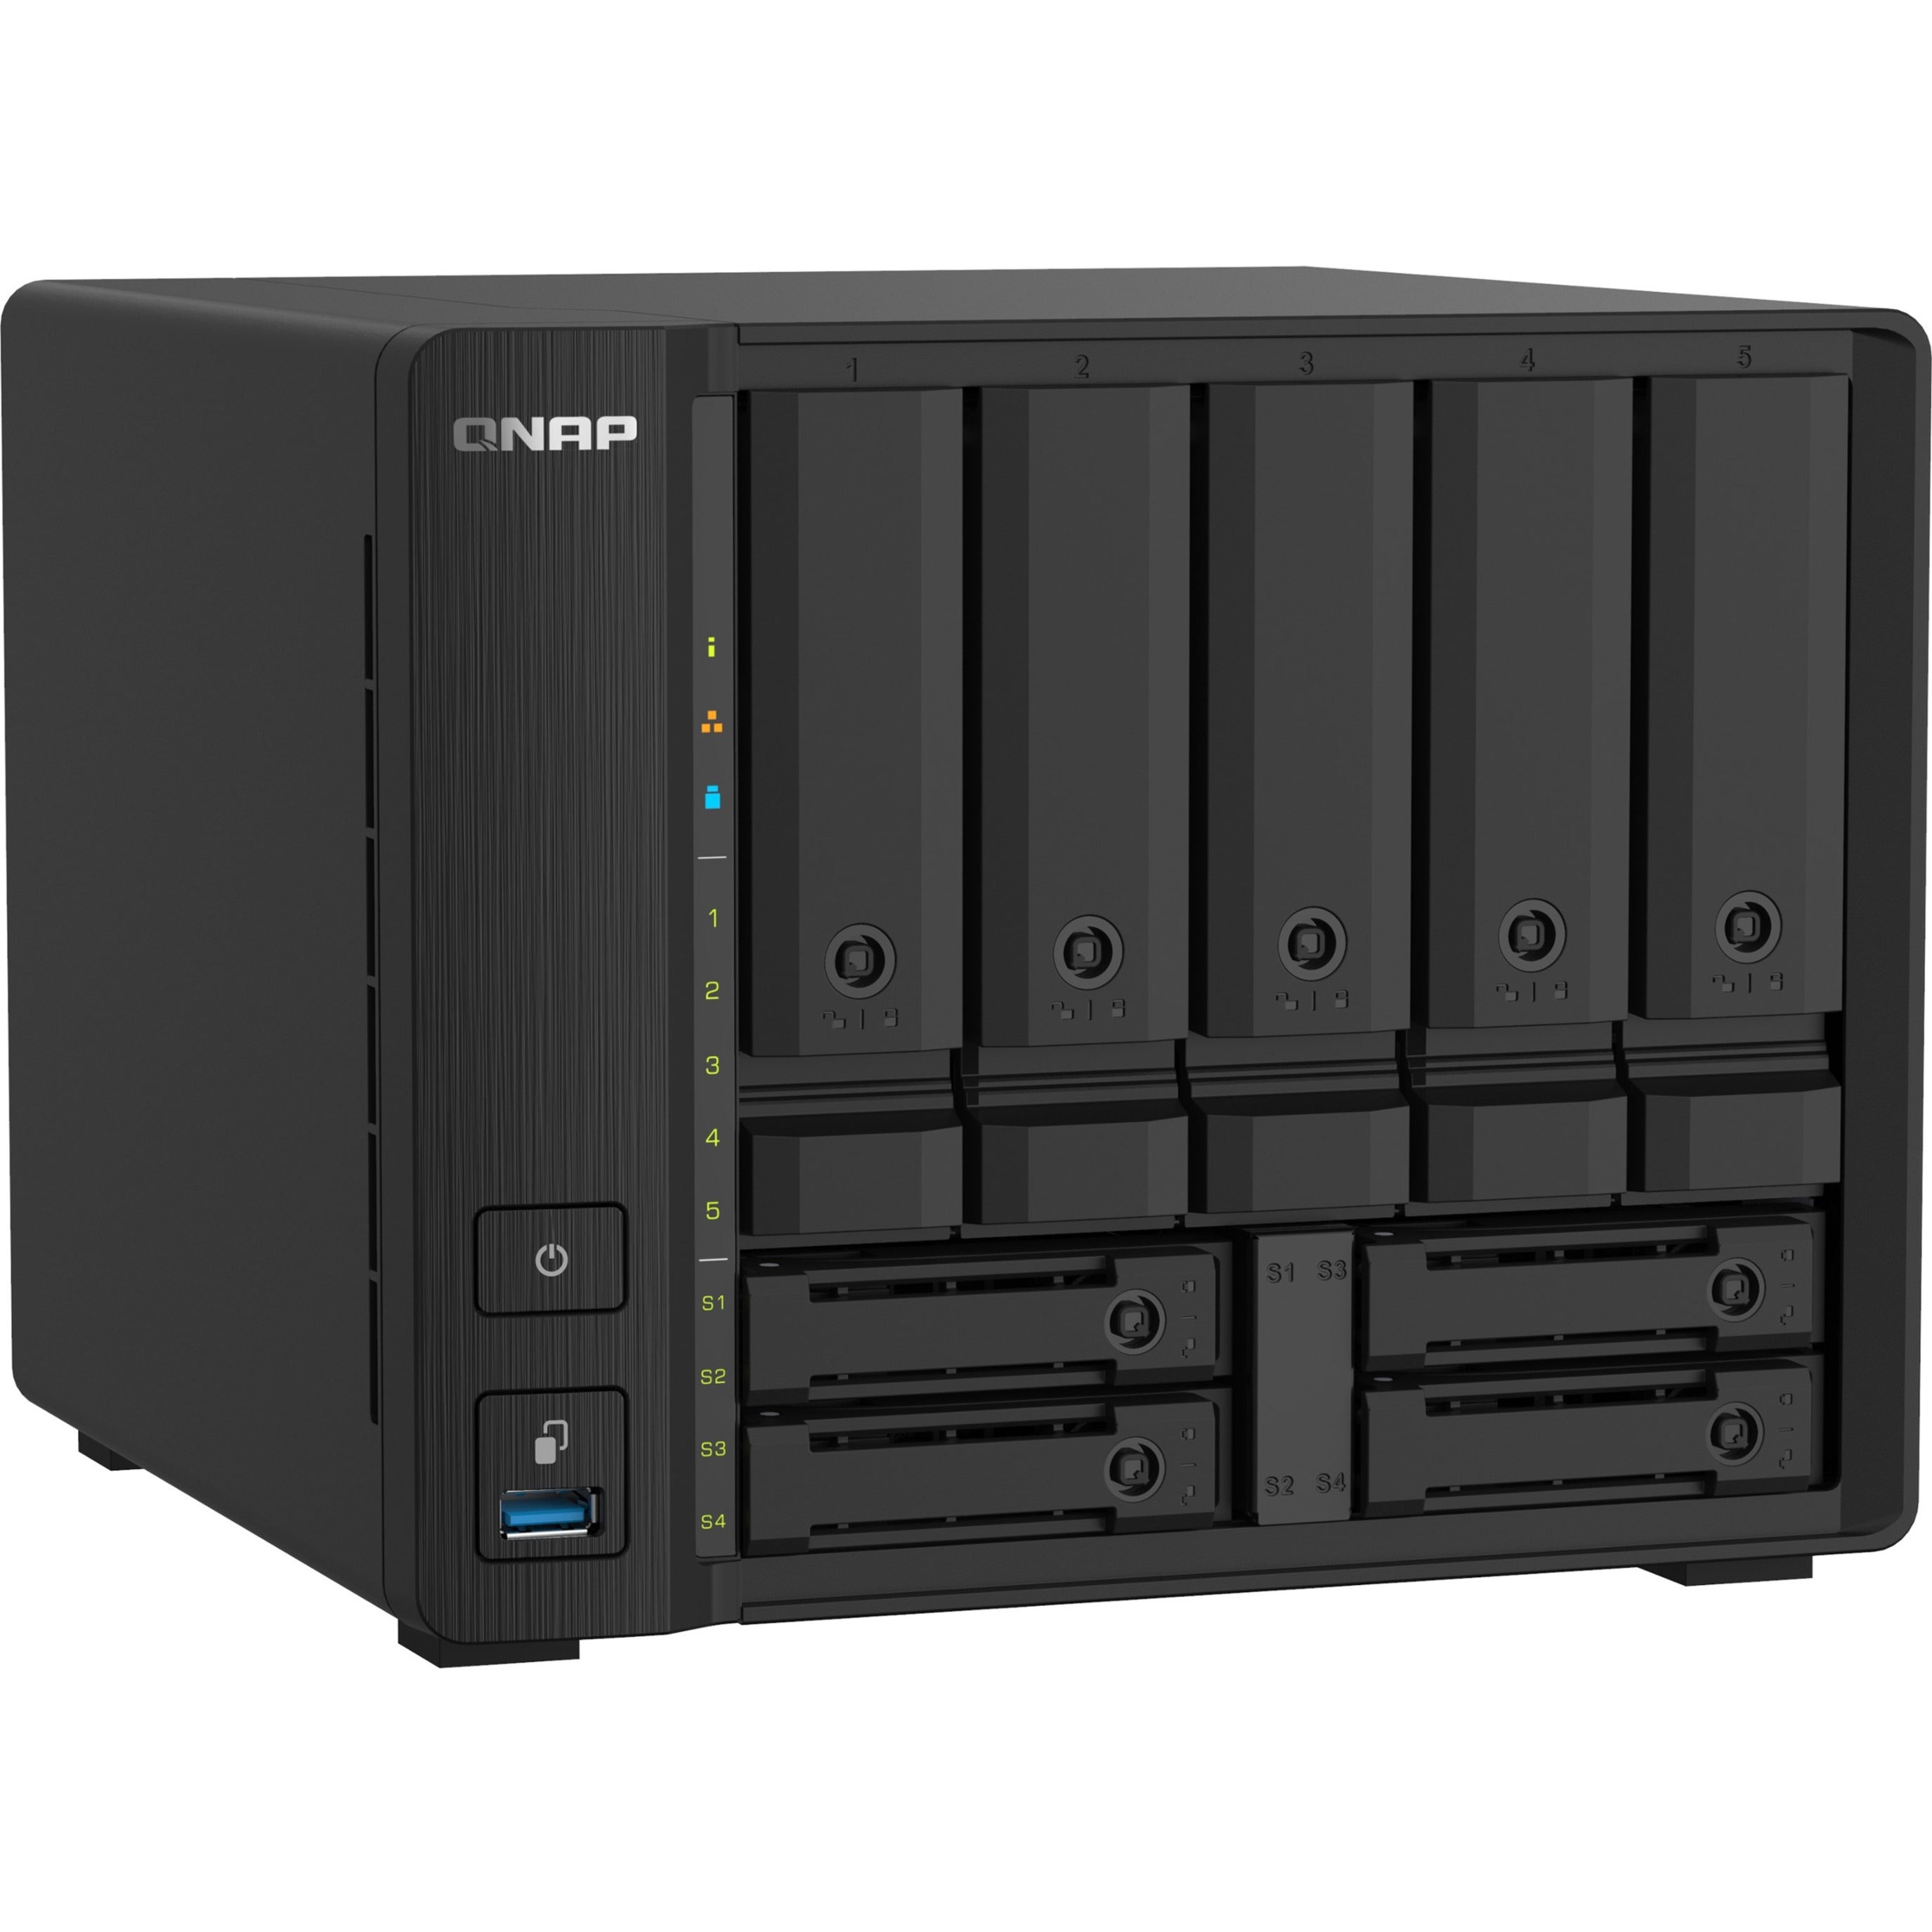 QNAP TS-932PX-4G-US Compact 9-bay NAS with 10GbE SFP+ and 2.5GbE for  Smoother File Applications